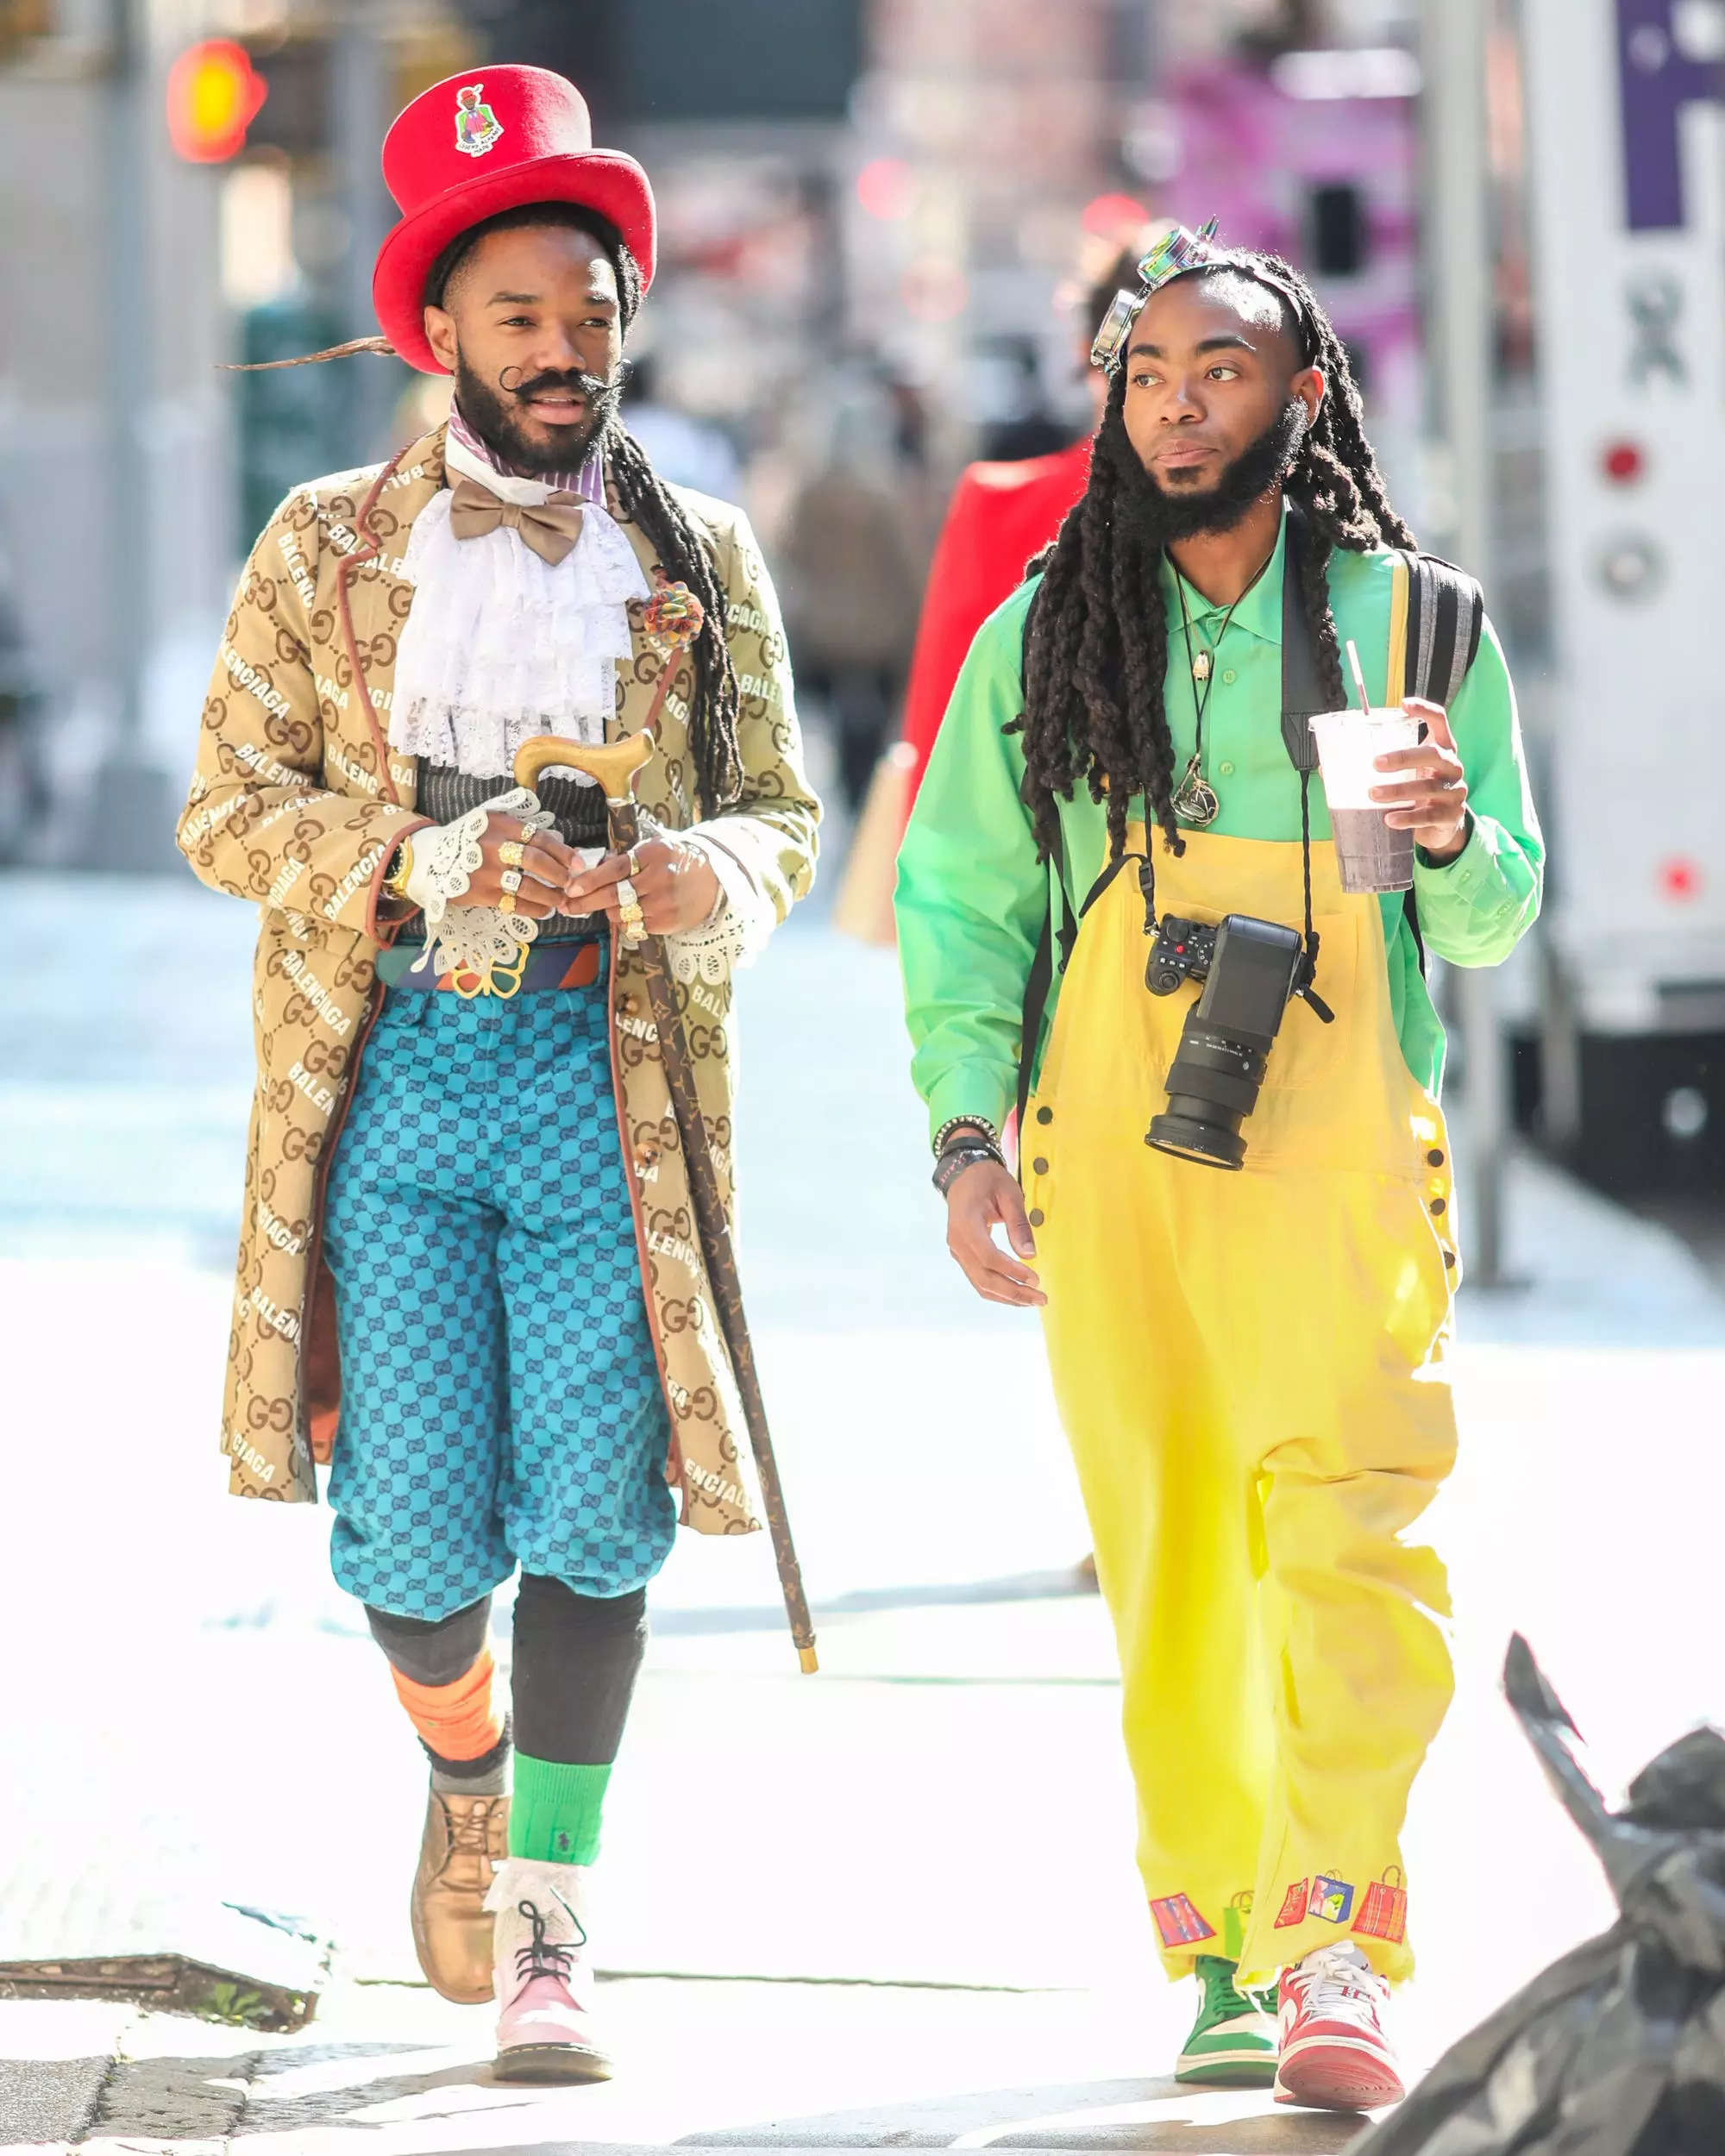 Two people in colorful outfits walk down the street in New York City